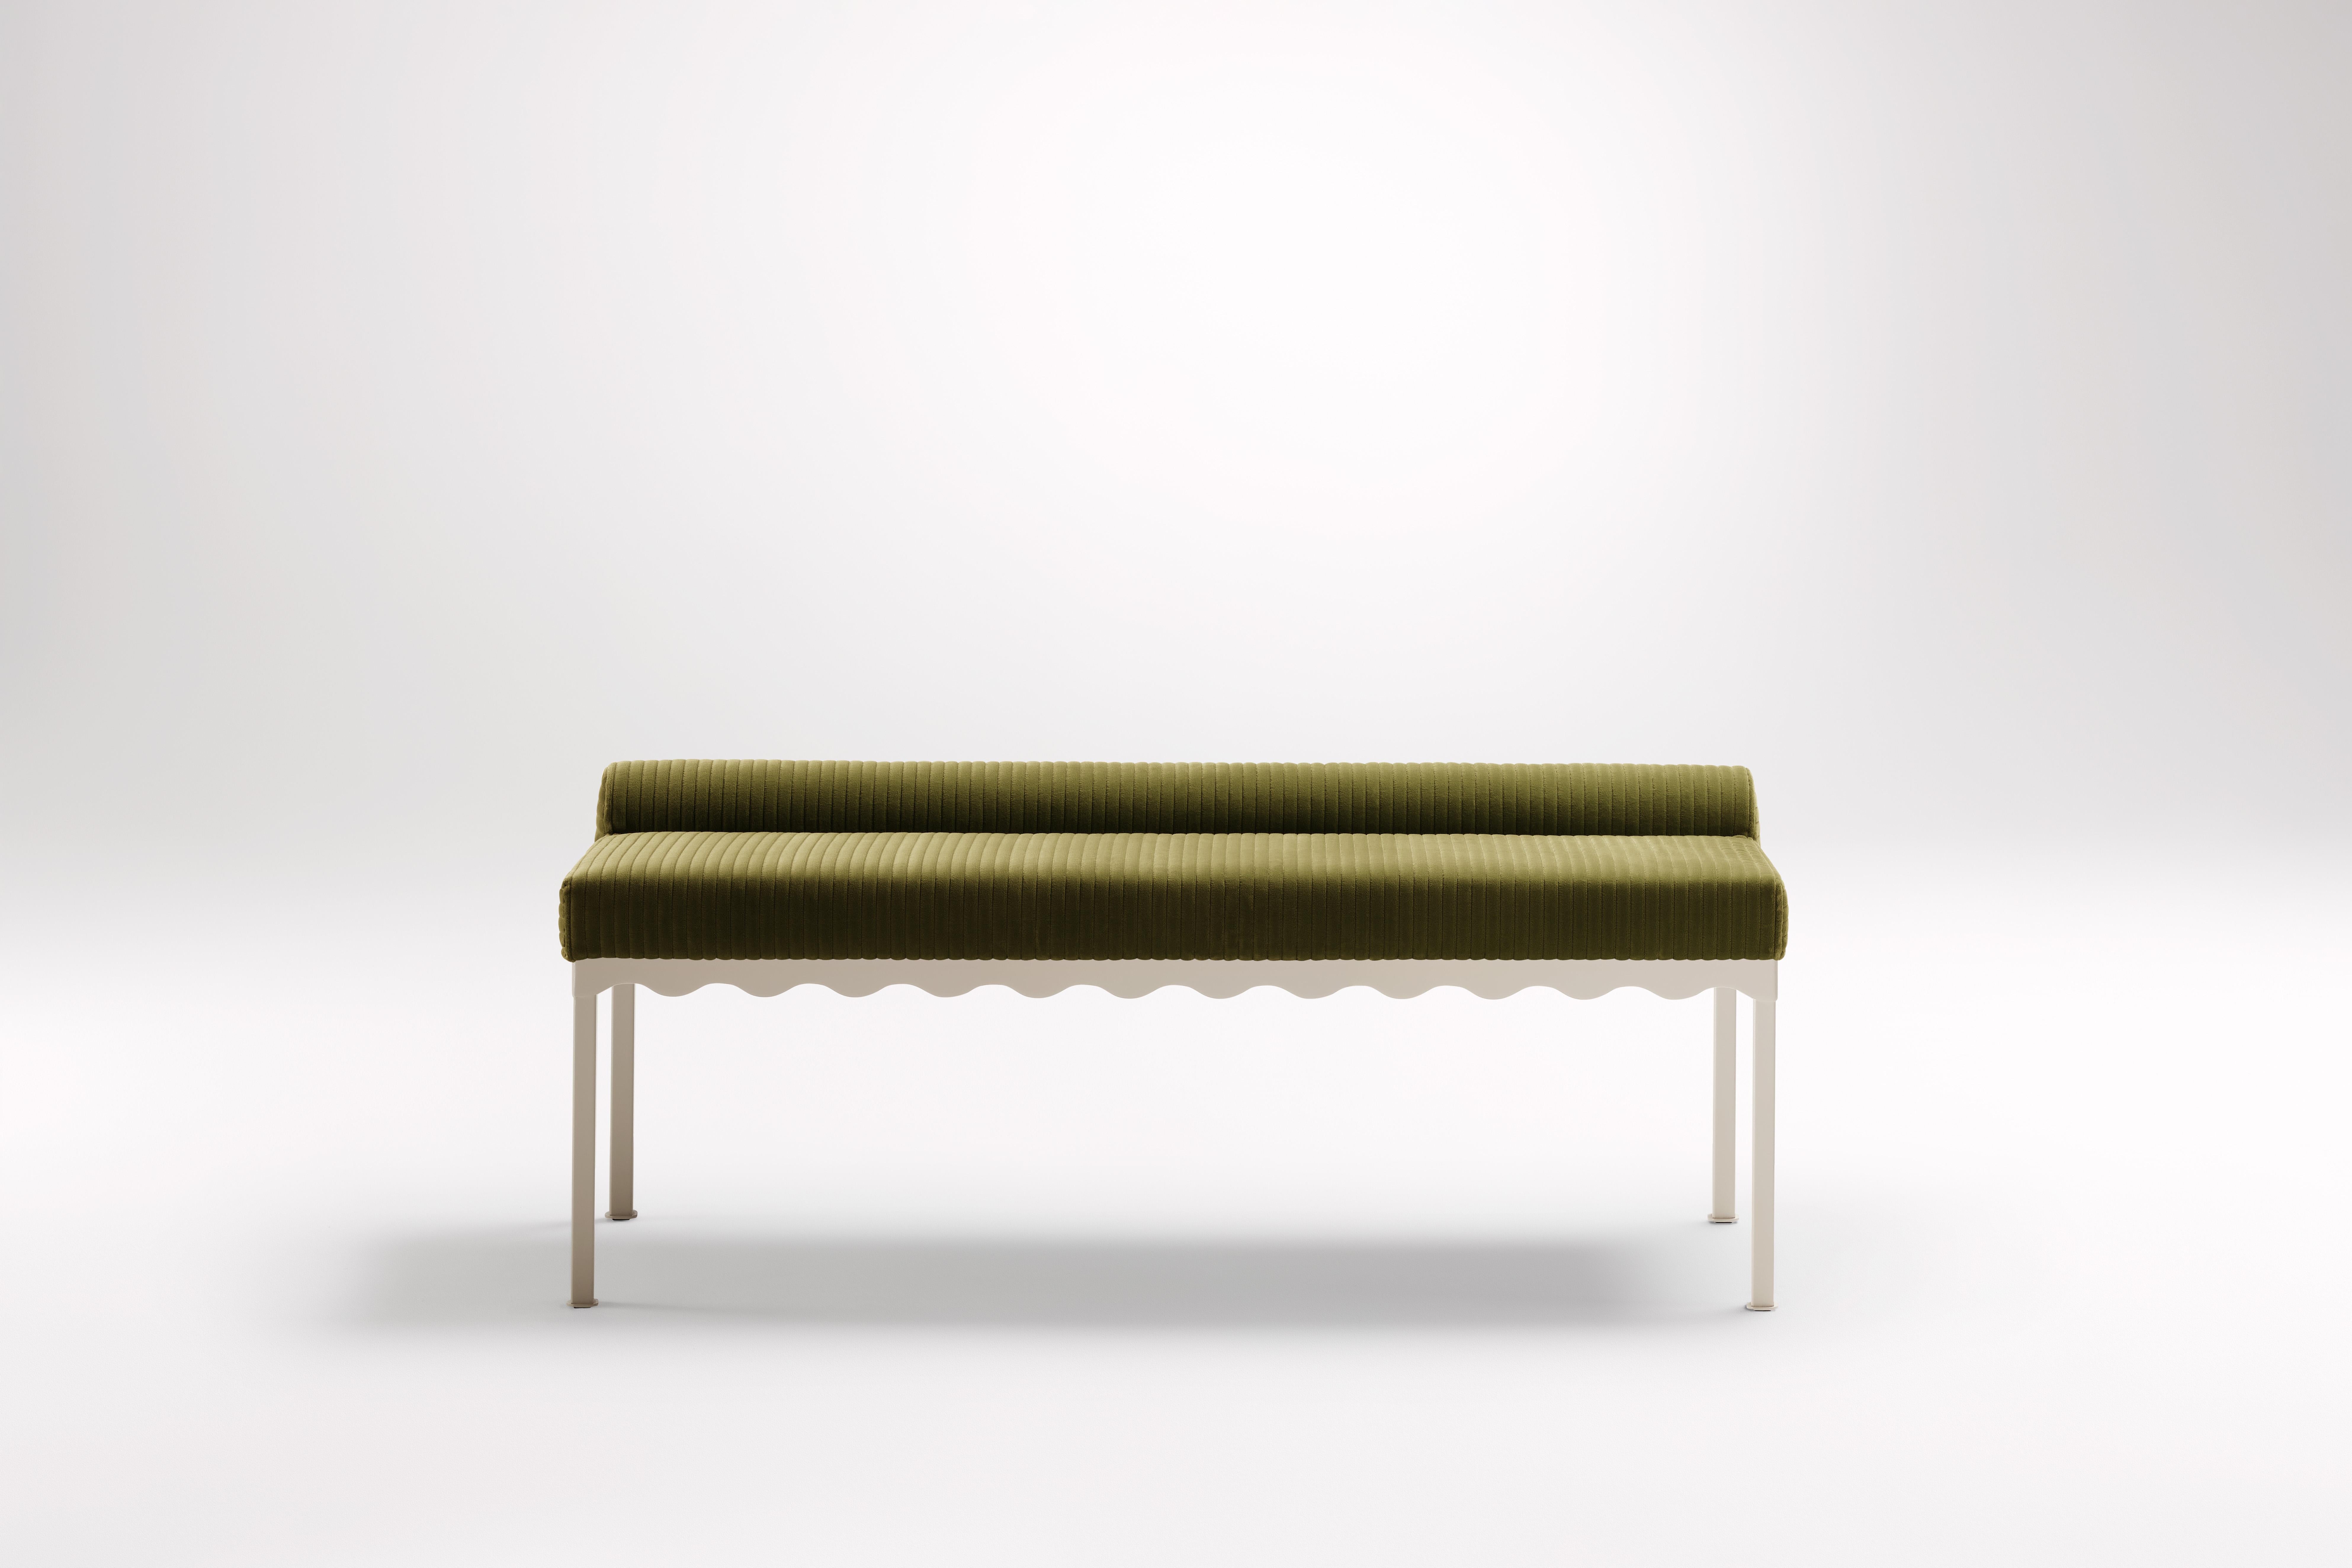 Oleander Bellini 1340 Bench by Coco Flip
Dimensions: D 134 x W 54 x H 52.5 cm
Materials: Timber / Upholstered tops, Powder-coated steel frame. 
Weight: 20 kg
Frame Finishes: Textura Paperbark.

Coco Flip is a Melbourne based furniture and lighting